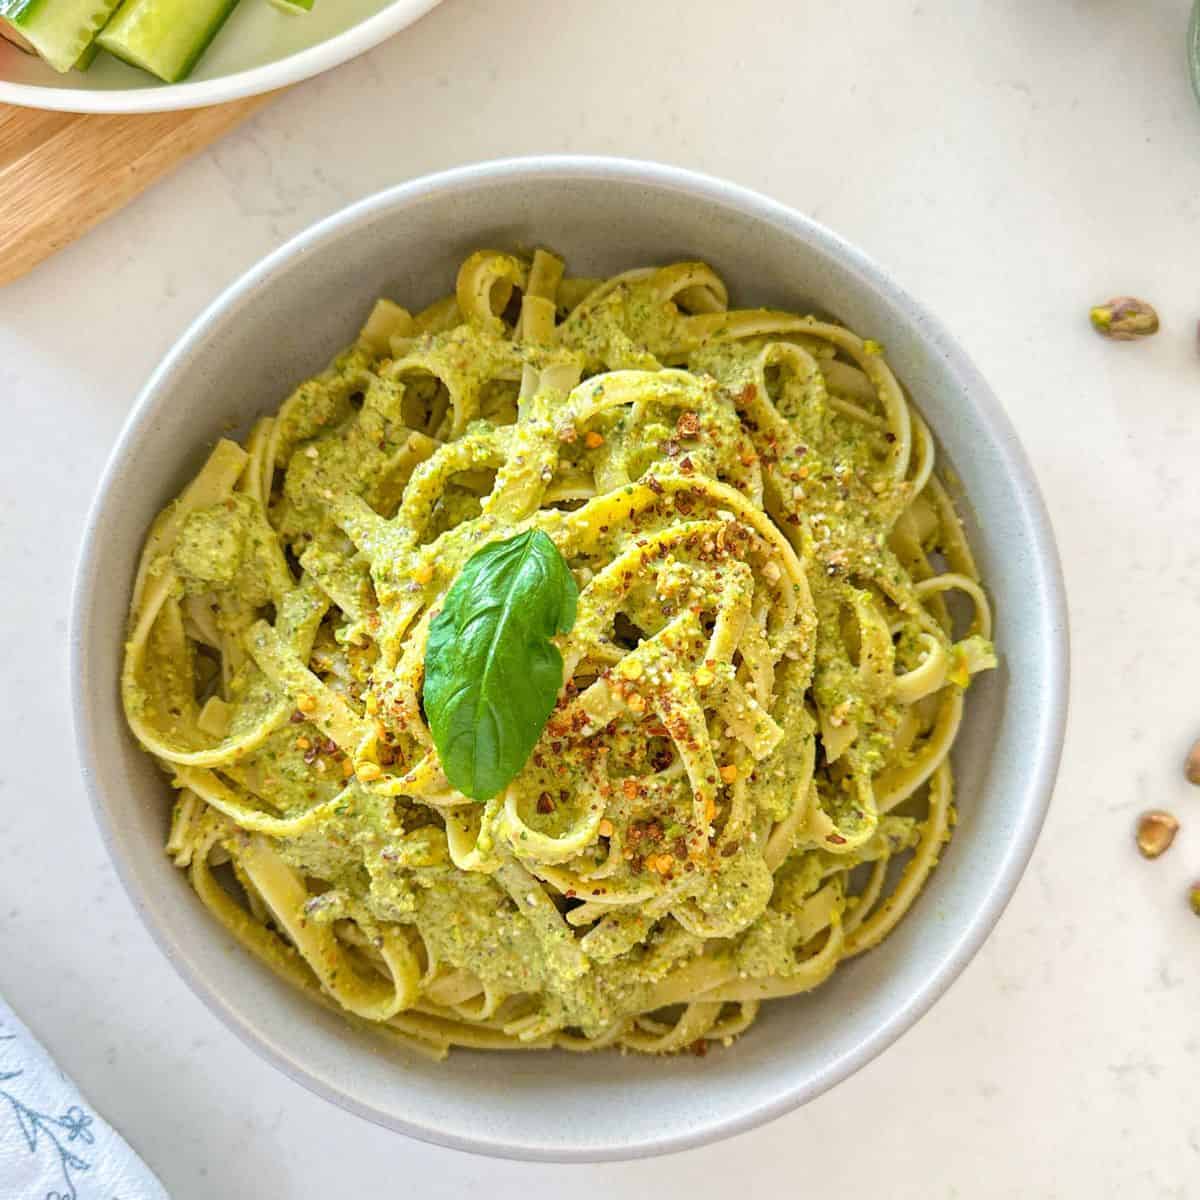 Bowl of fettuccini with pesto sauce, red pepper flakes and basil on top.